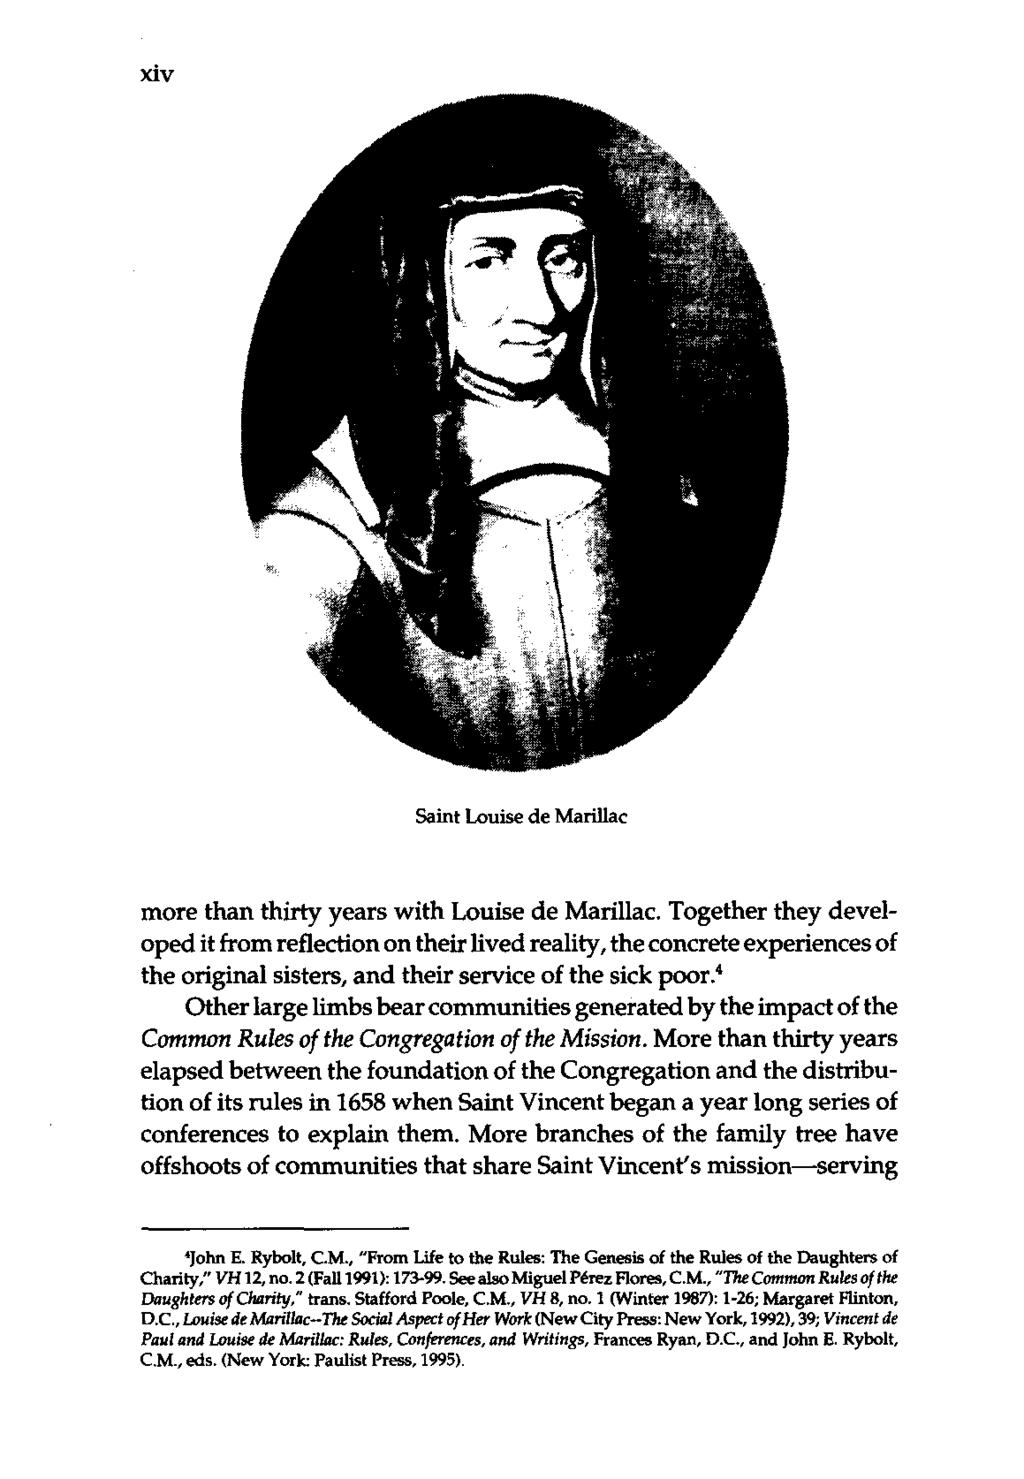 xiv Saint Louise de Marillac more than thirty years with Louise de Marillac.